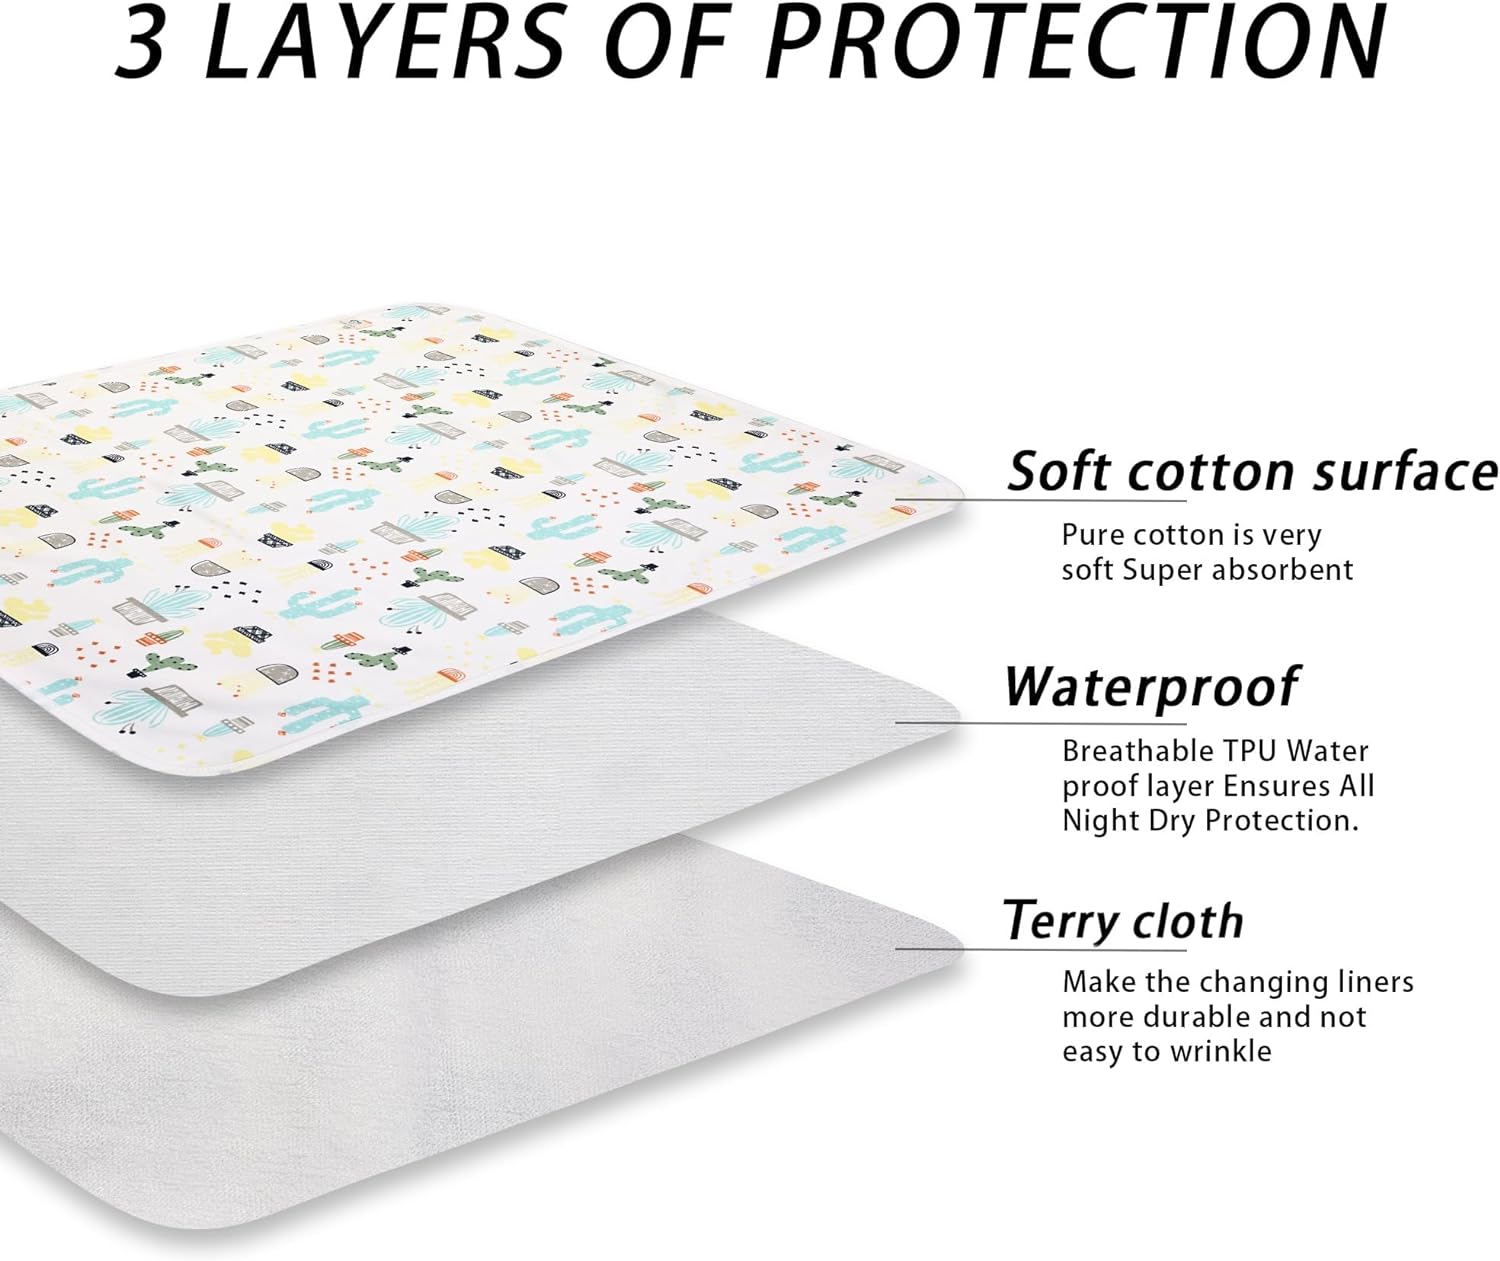 Baby Diaper Changing Pad Liners(22x27.5 inches) Soft Bamboo Cotton Waterproof Changing Pad for Baby Underpads Mattress Pad Sheet Protector Portable Reusable Urine Pads for Travel Gear Pack of 3